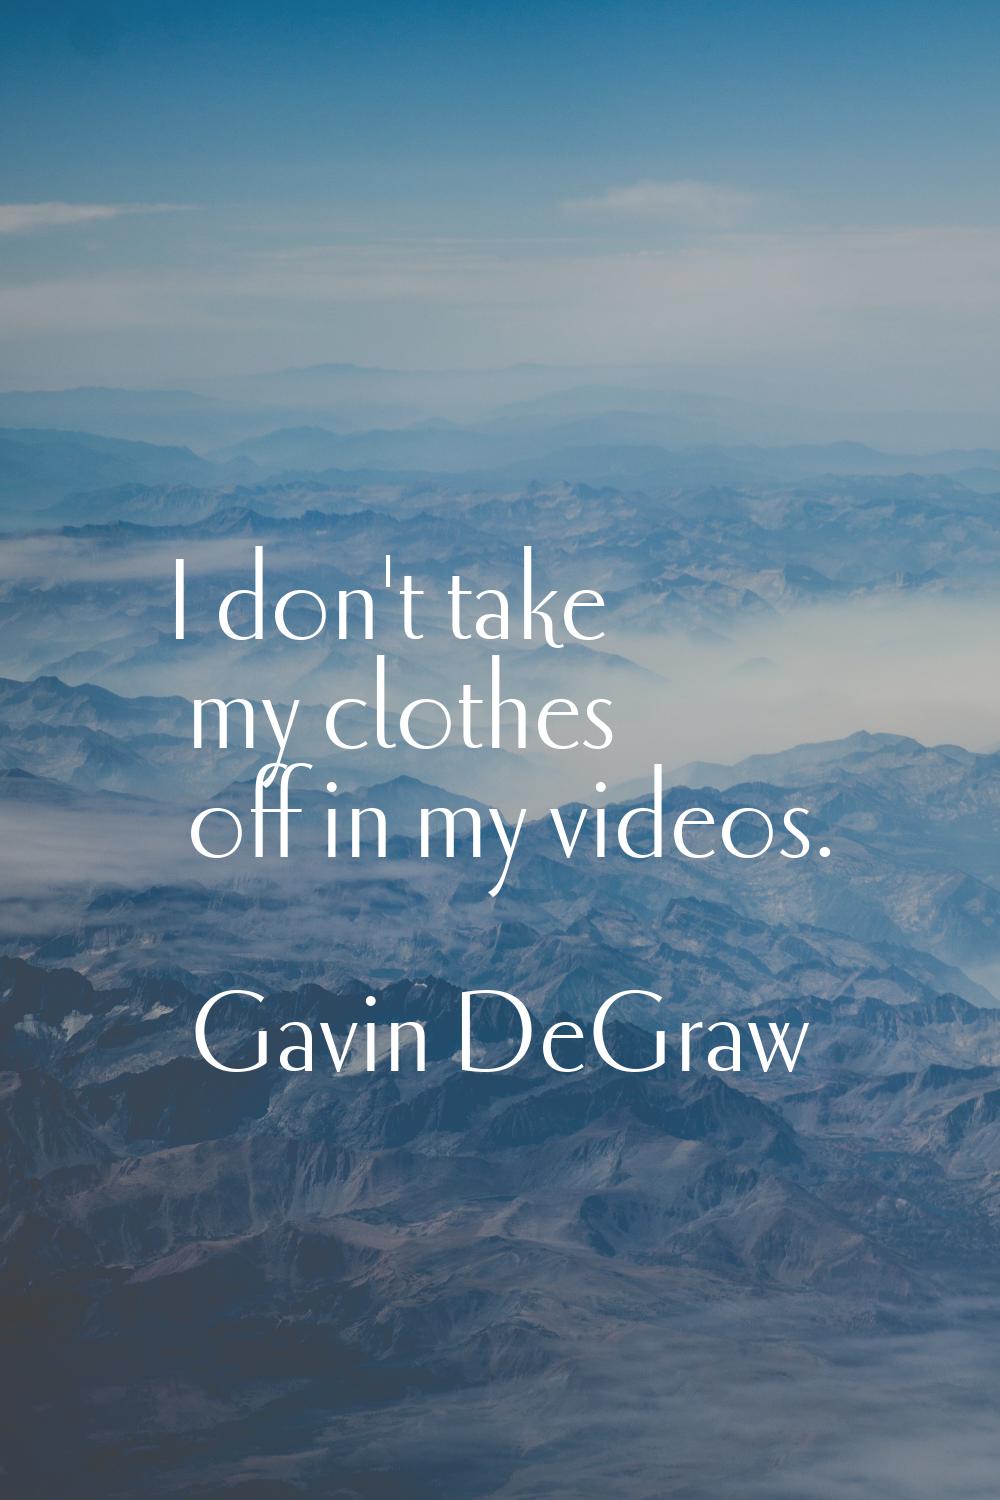 I don't take my clothes off in my videos.